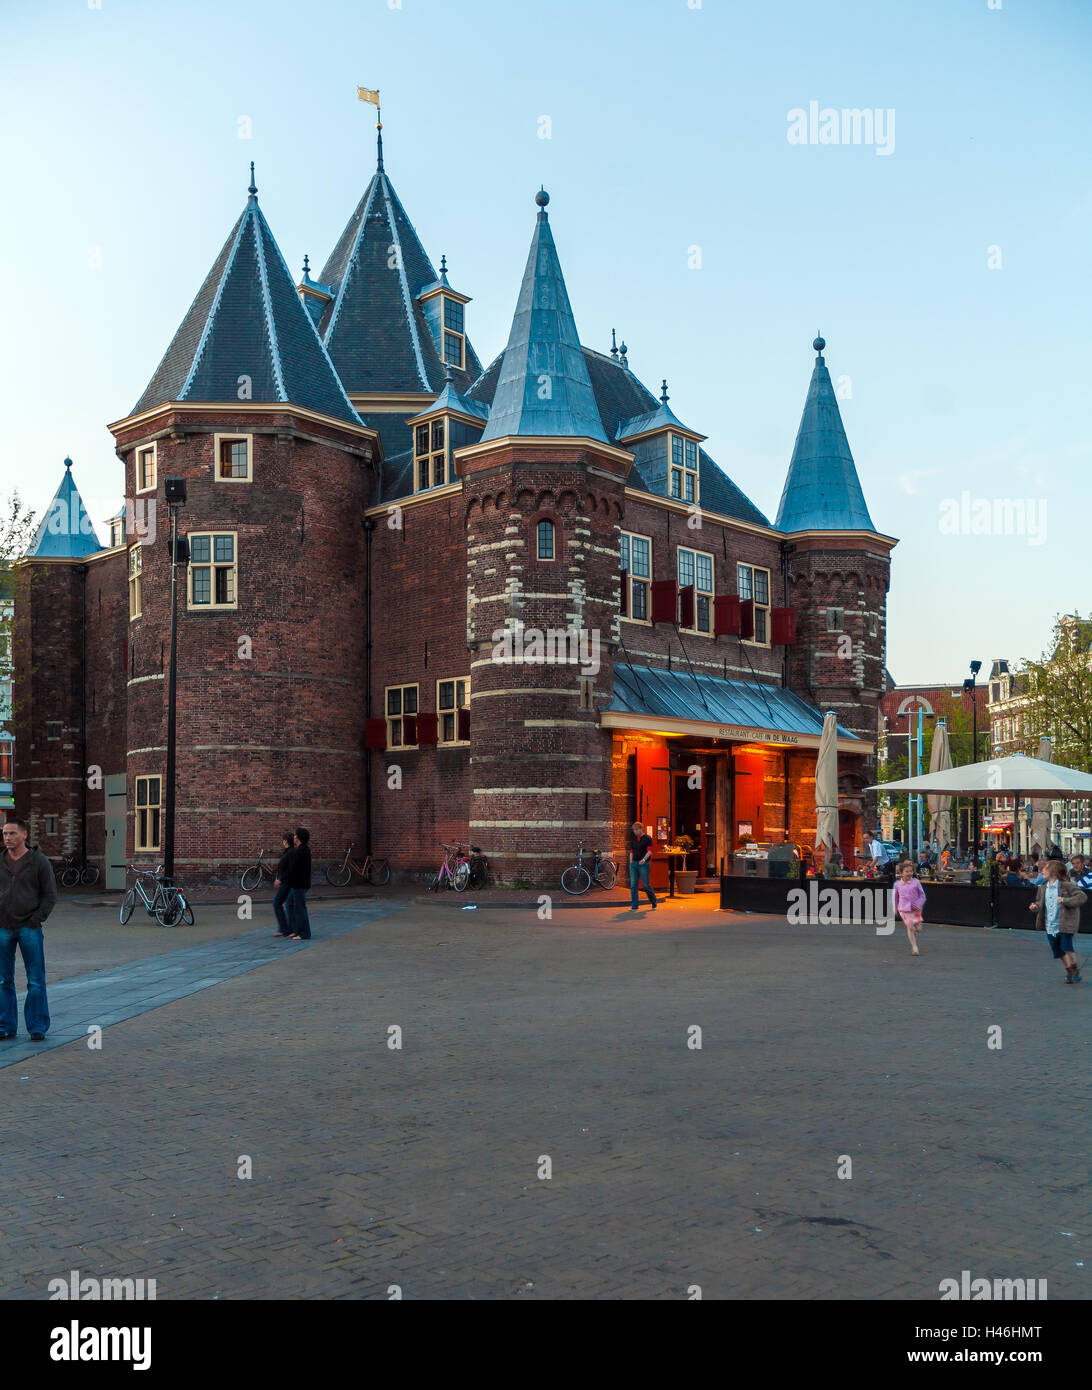 AMSTERDAM, NETHERLANDS - APRIL 4, 2008: Tourists eat at a cafe in the building of The Waag (weigh house) on Nieuwmarkt square Stock Photo